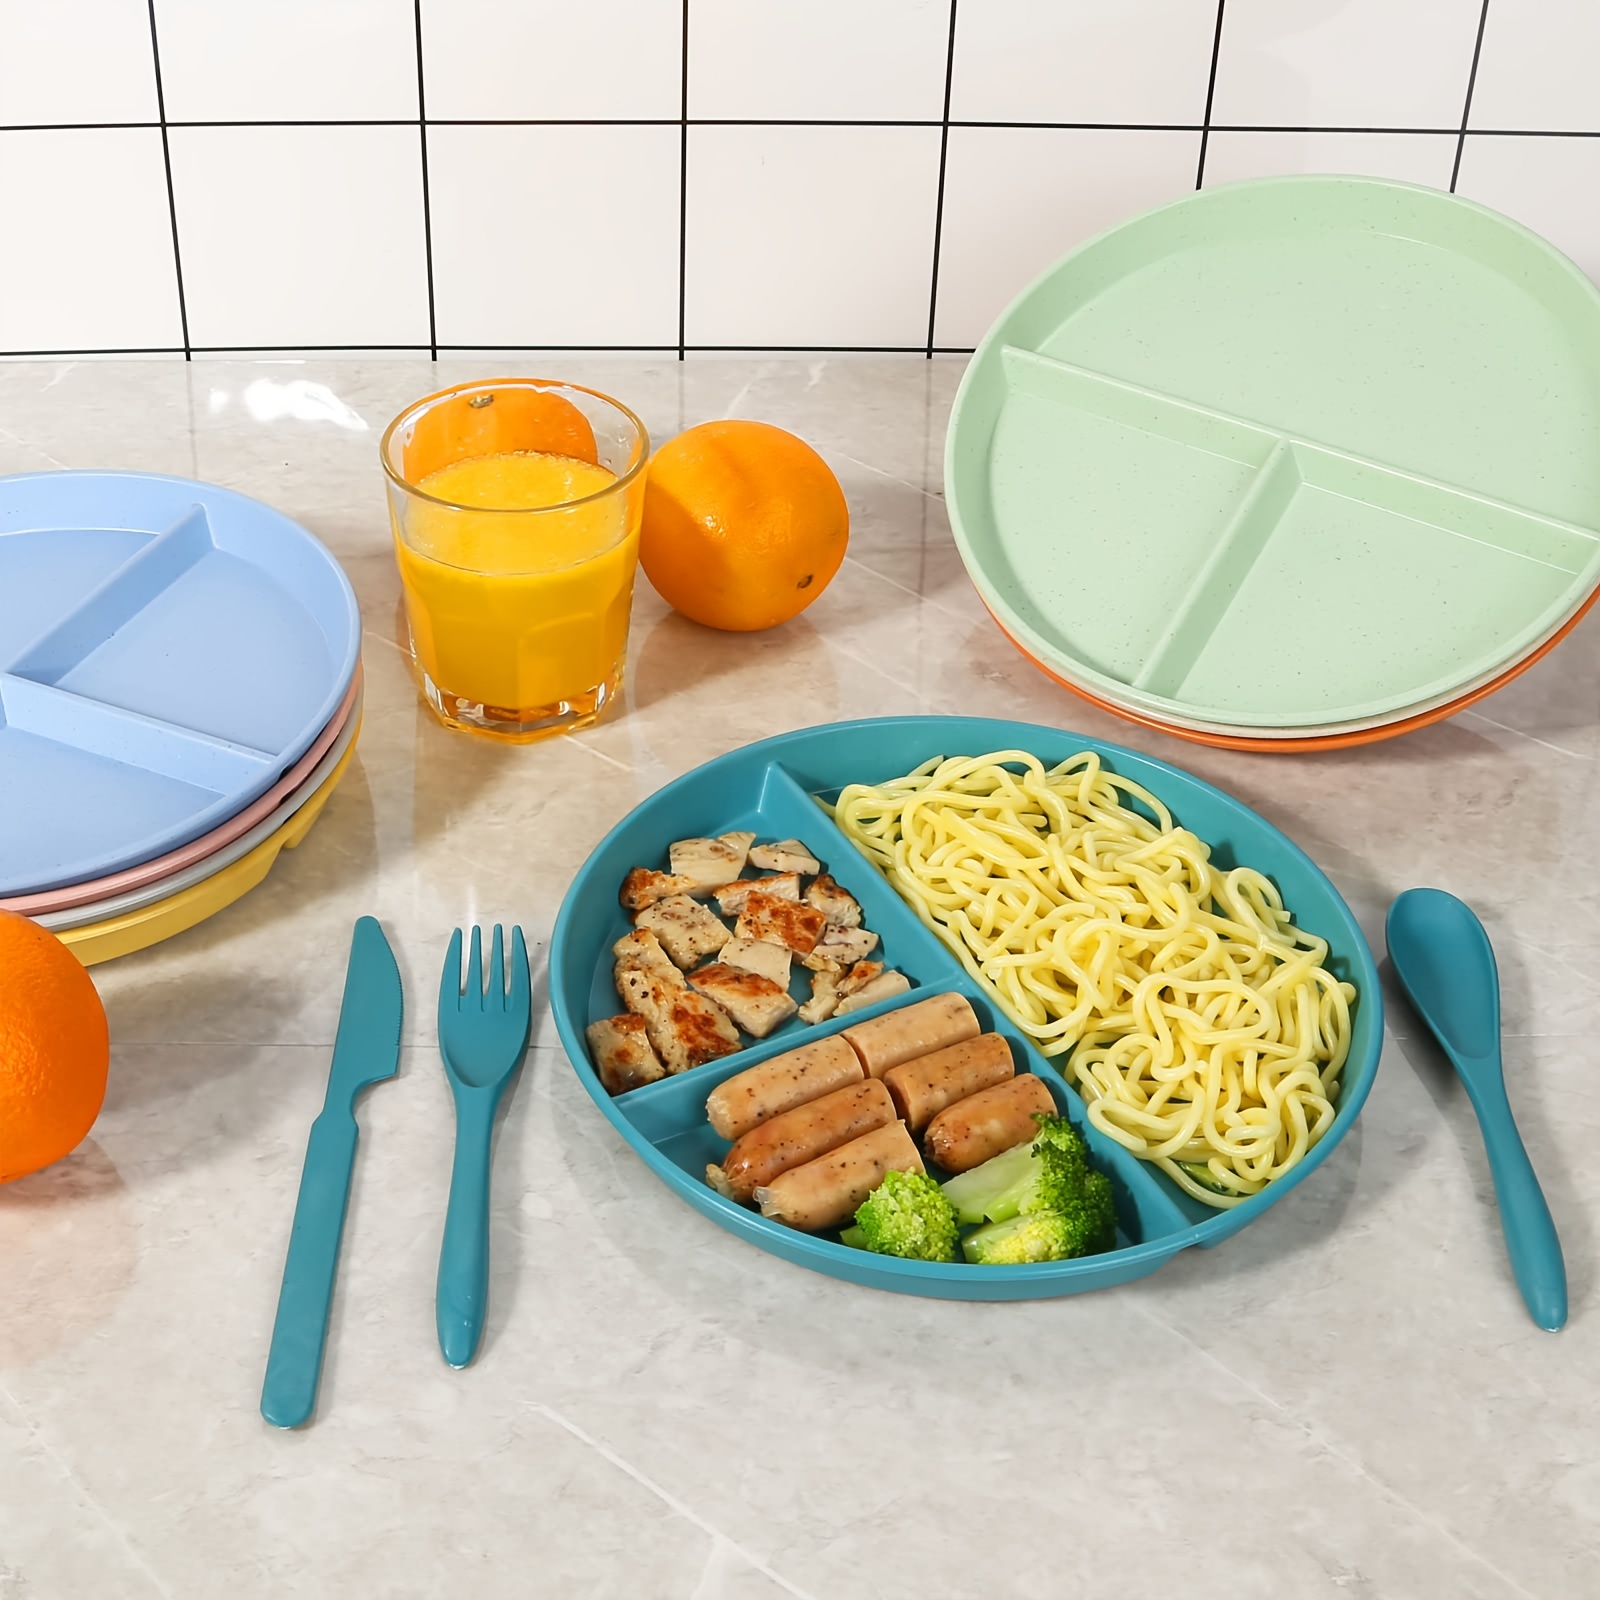 Portion Plate with Lid, 3 Compartment (Pack of 2) at .